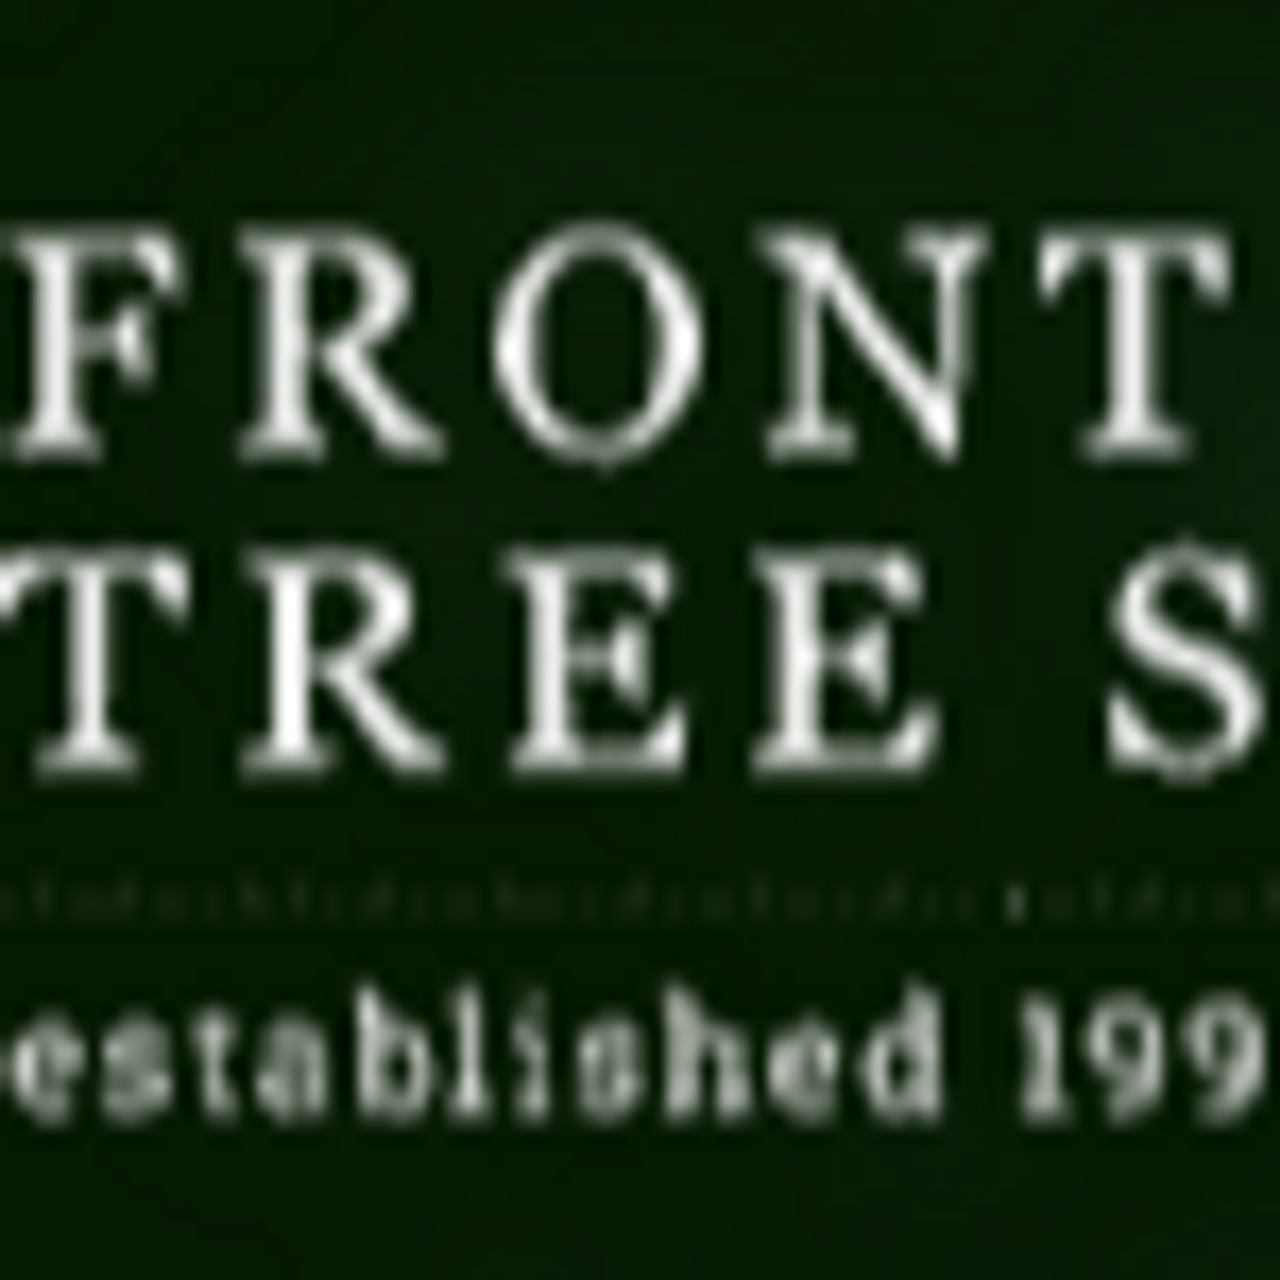 FrontierTree